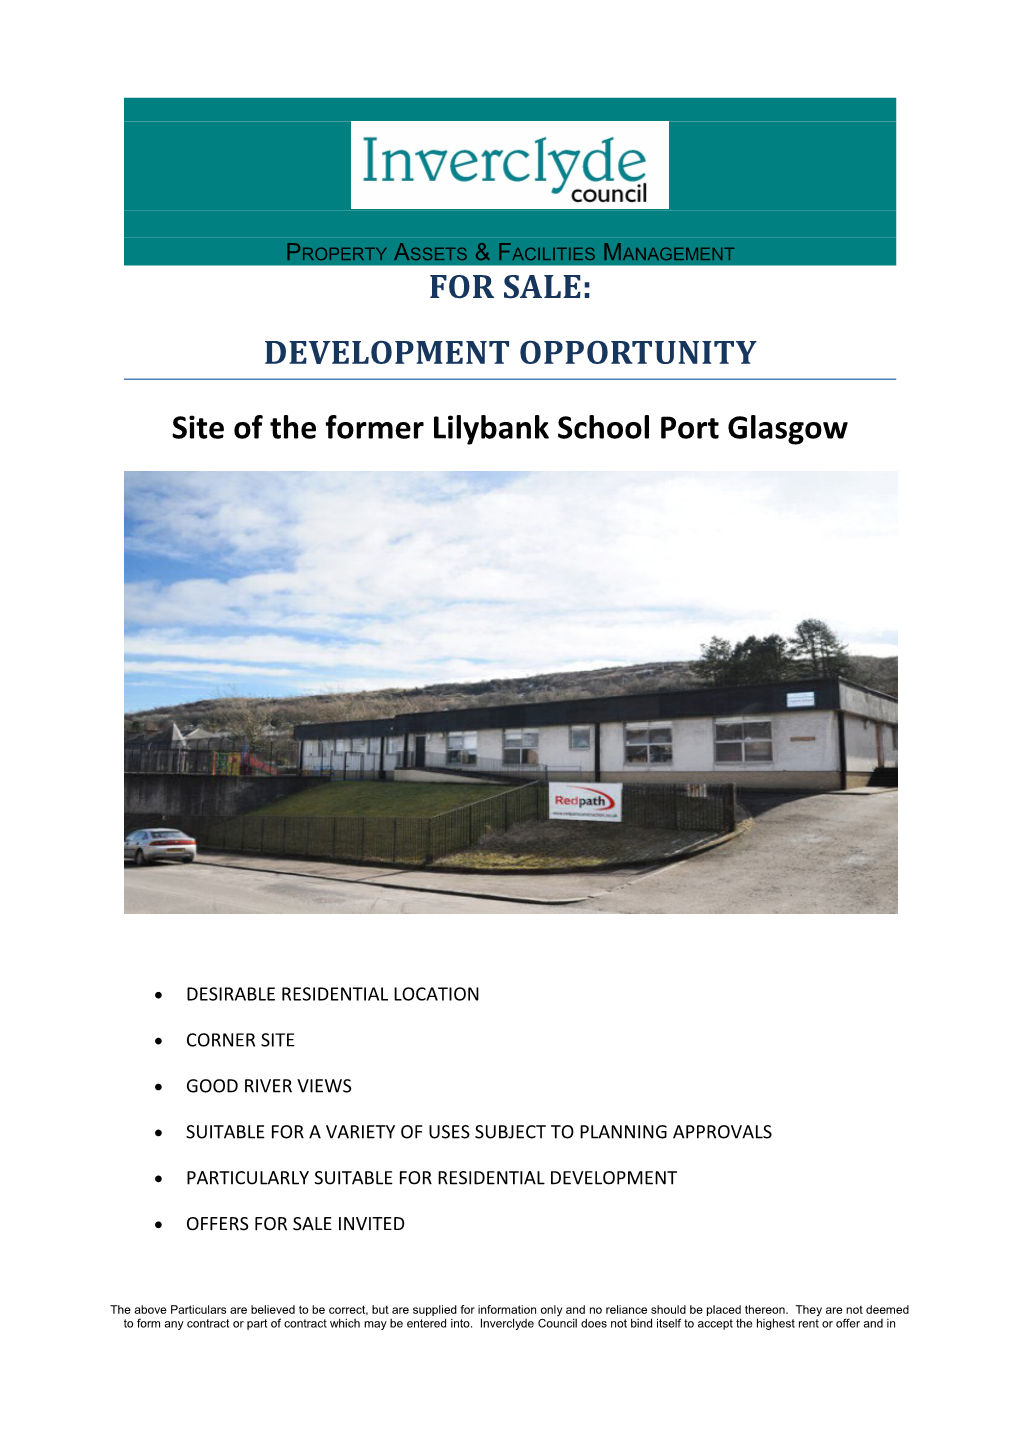 Site of the Former Lilybank School Port Glasgow